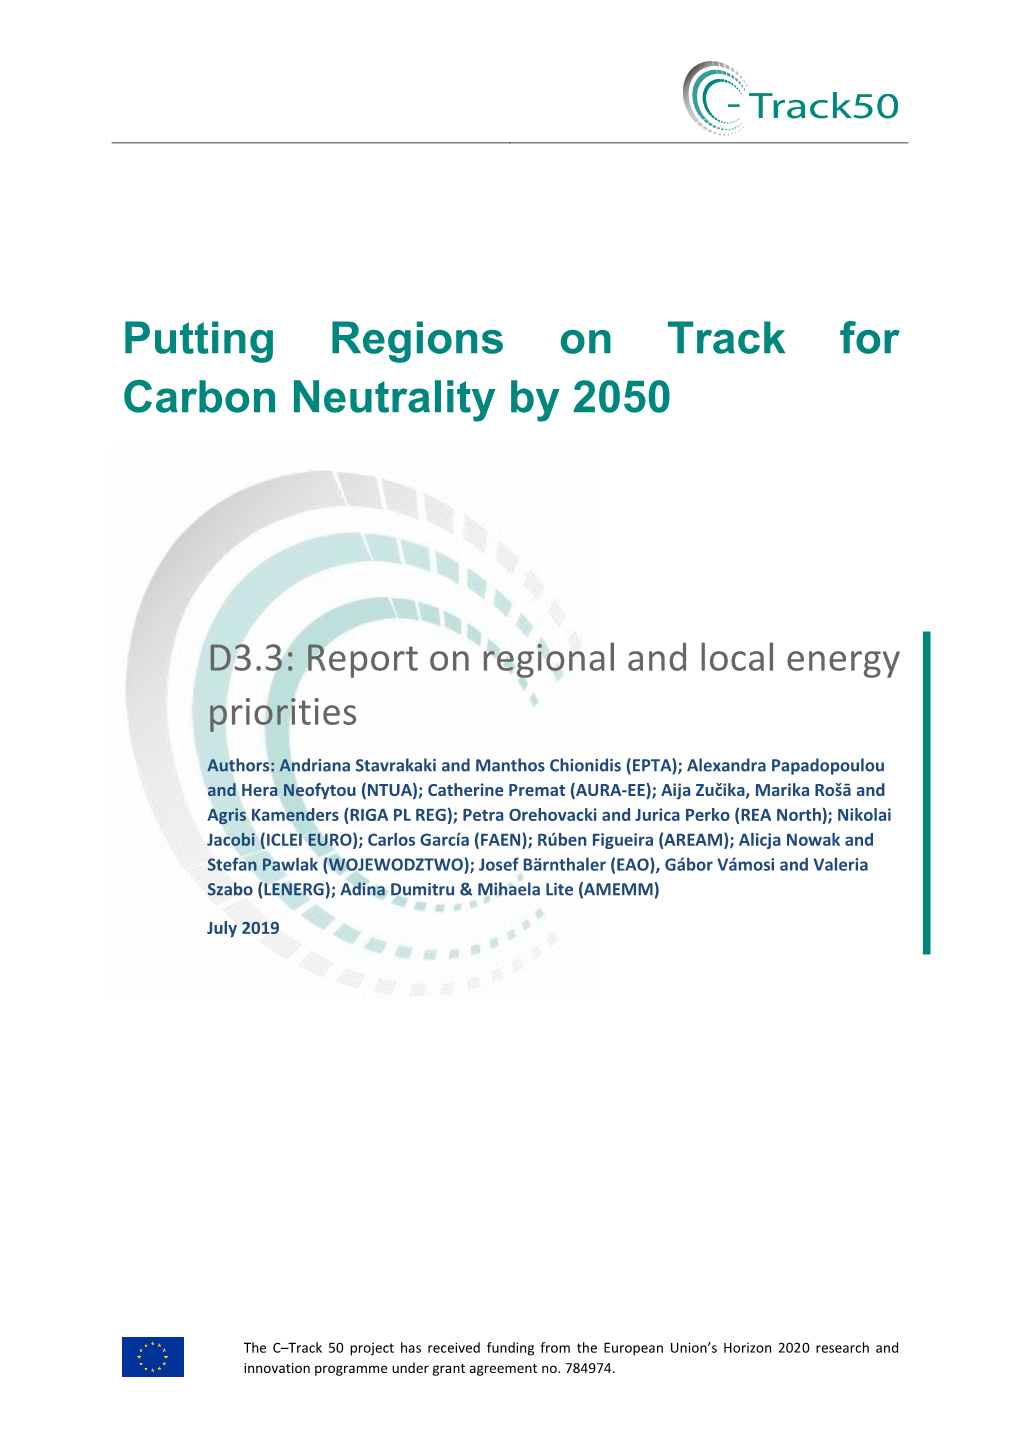 Putting Regions on Track for Carbon Neutrality by 2050